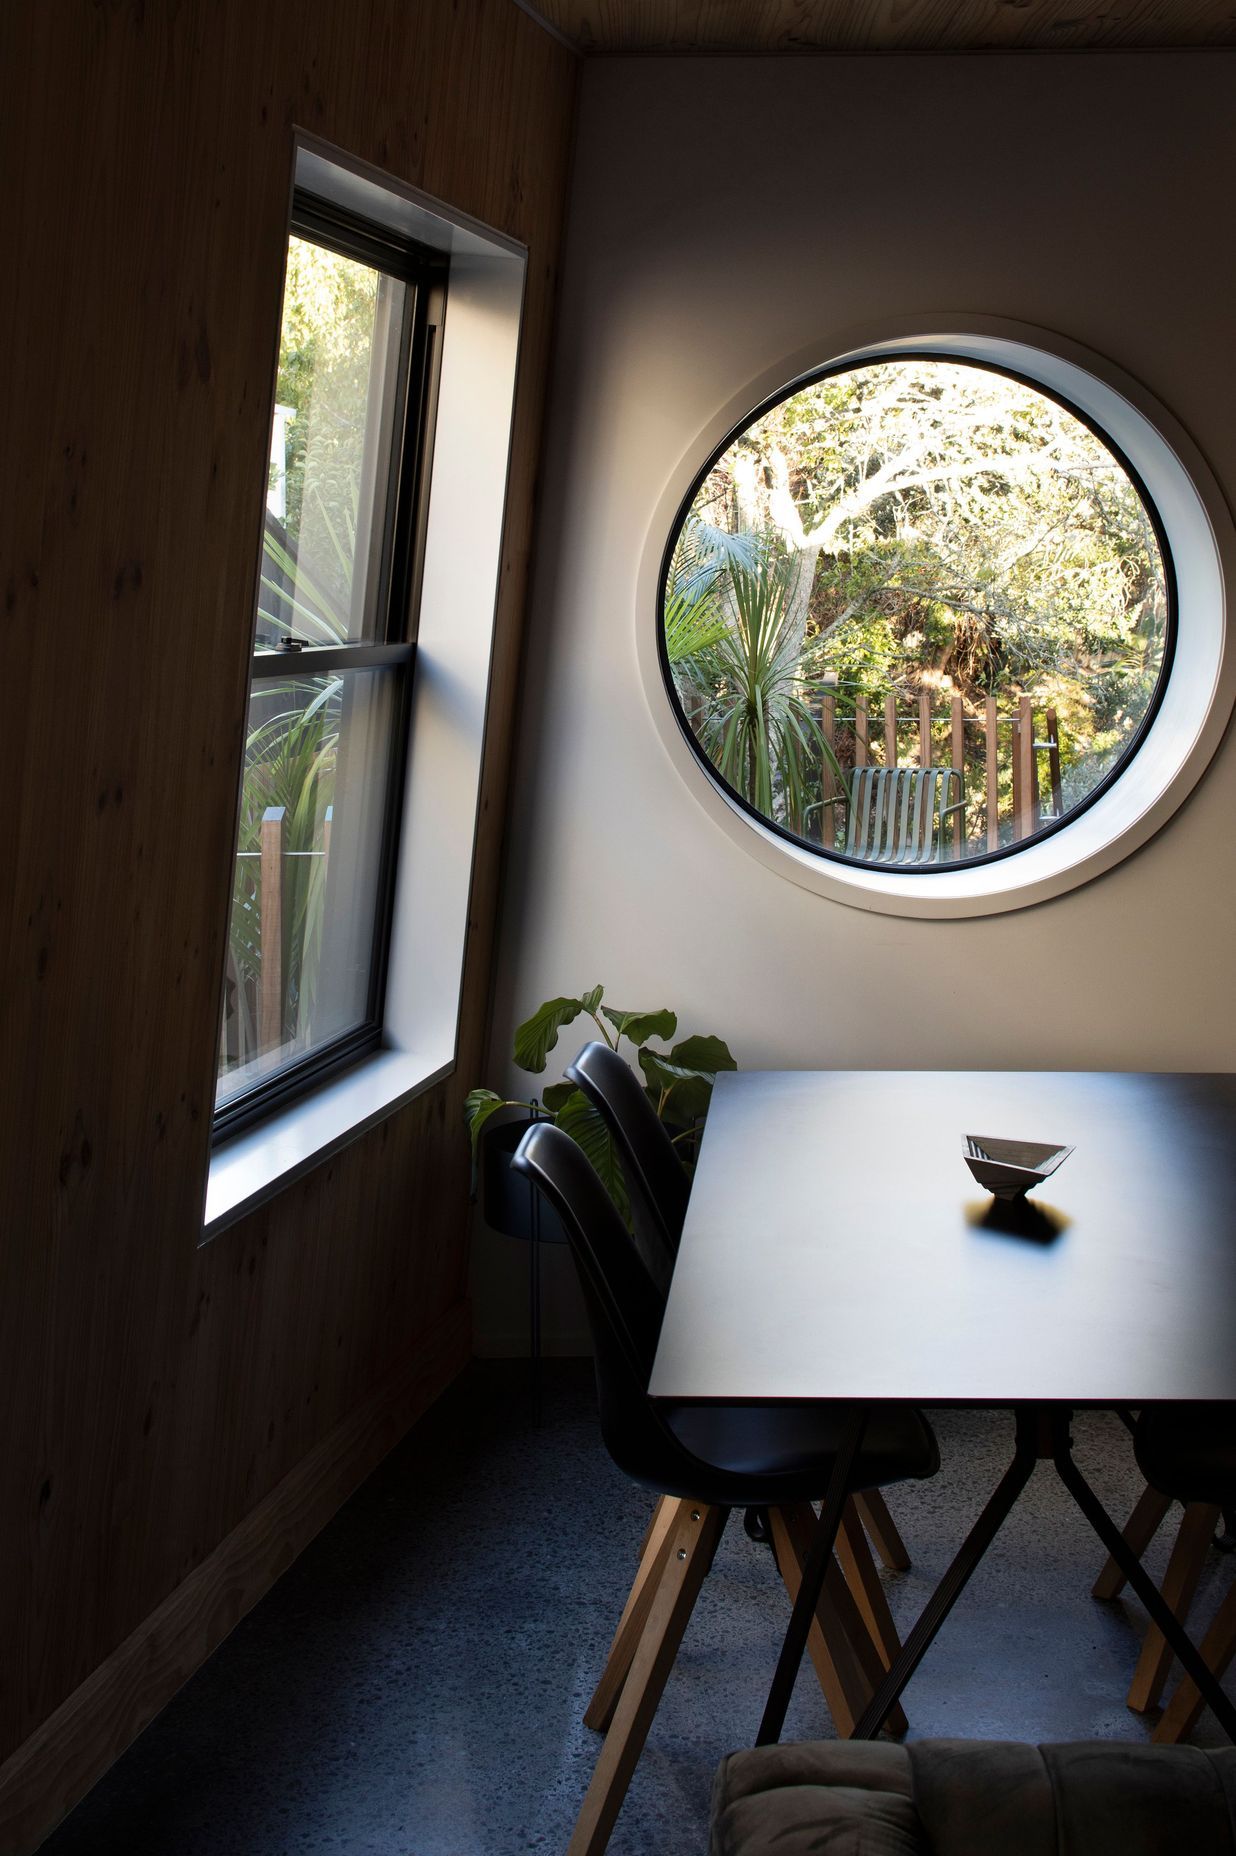 A port hole in the dining area looks out over the deck to the plum tree.